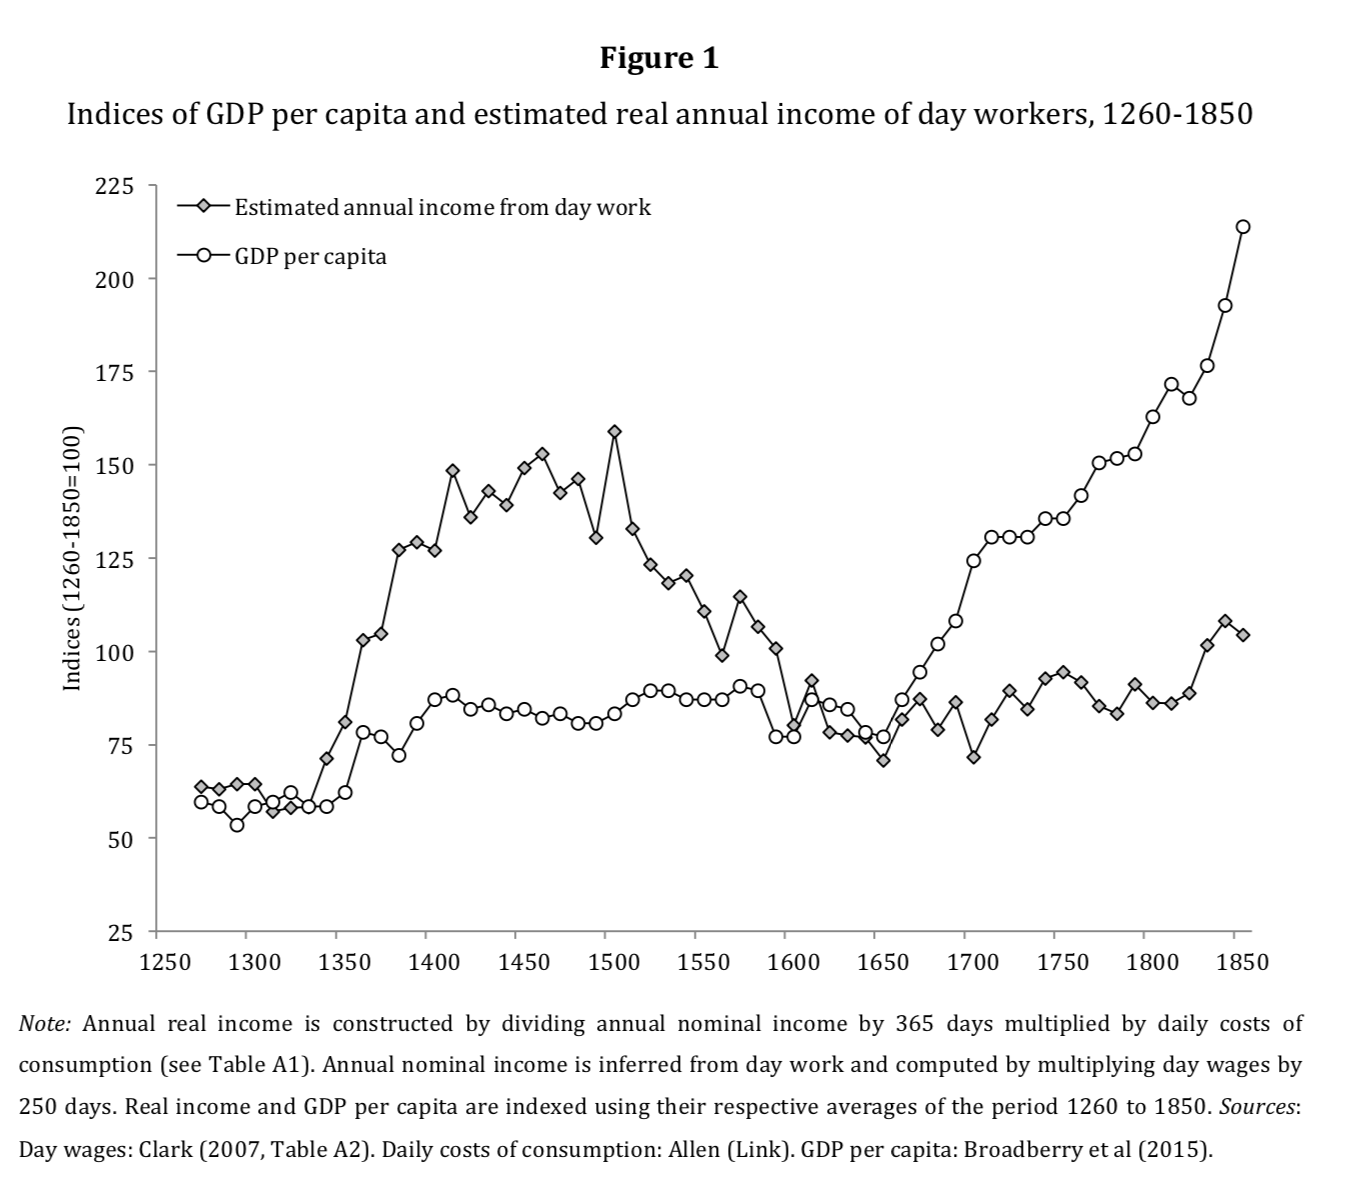 GDP per capita and wages